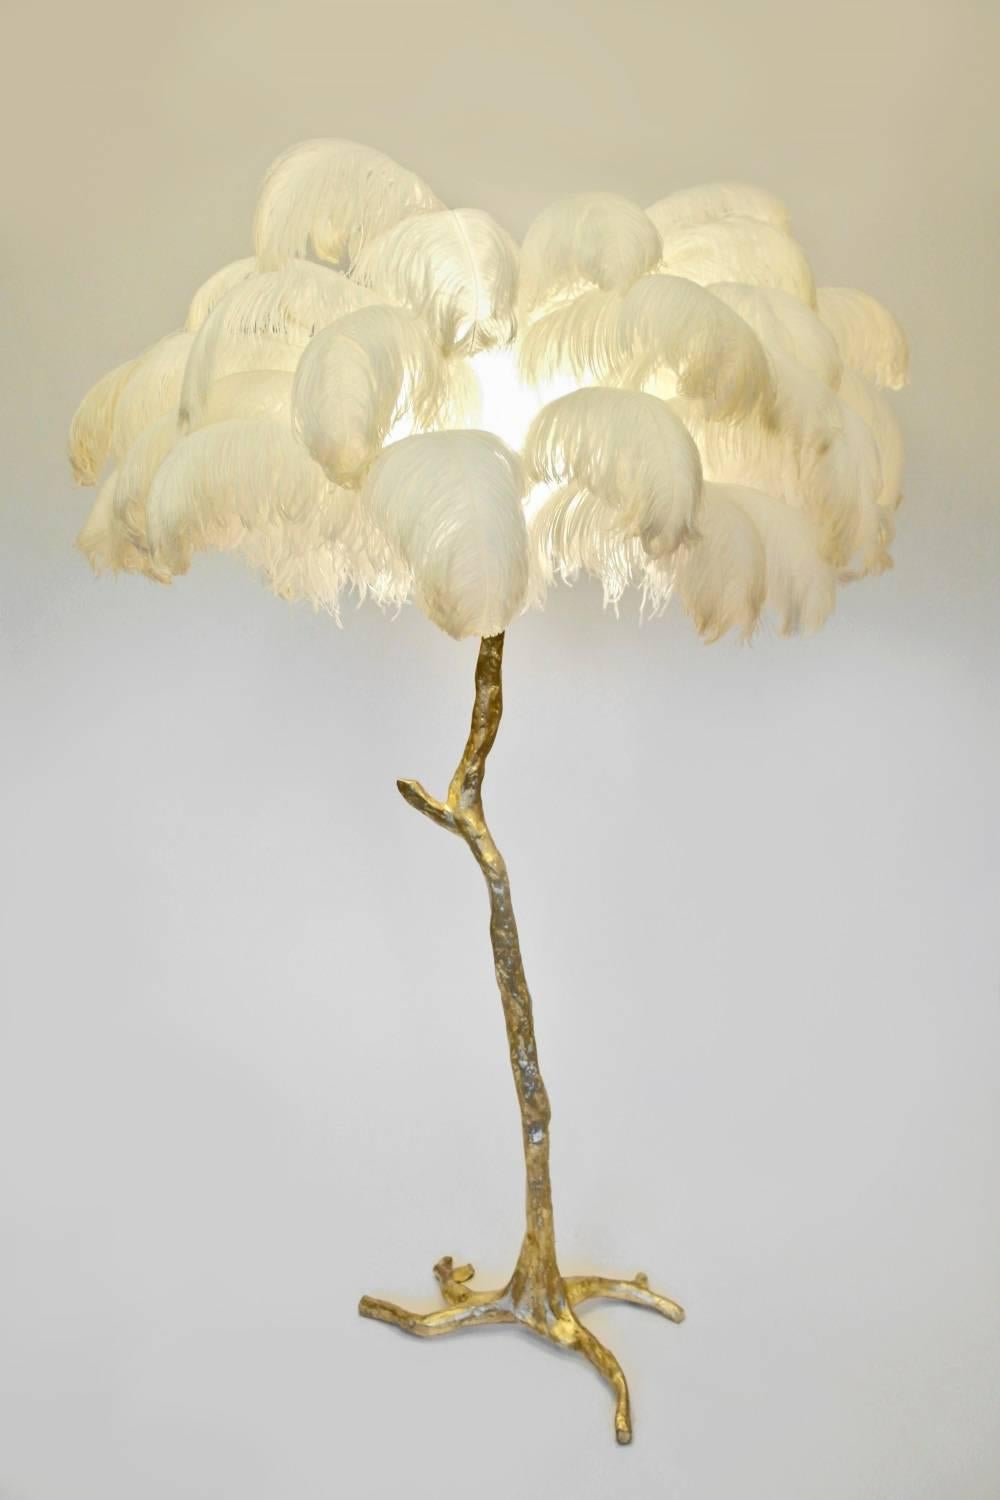 Great Britain (UK) Hollywood Regency Sculptural Ostrich Feather Palm Tree Floor Lamp